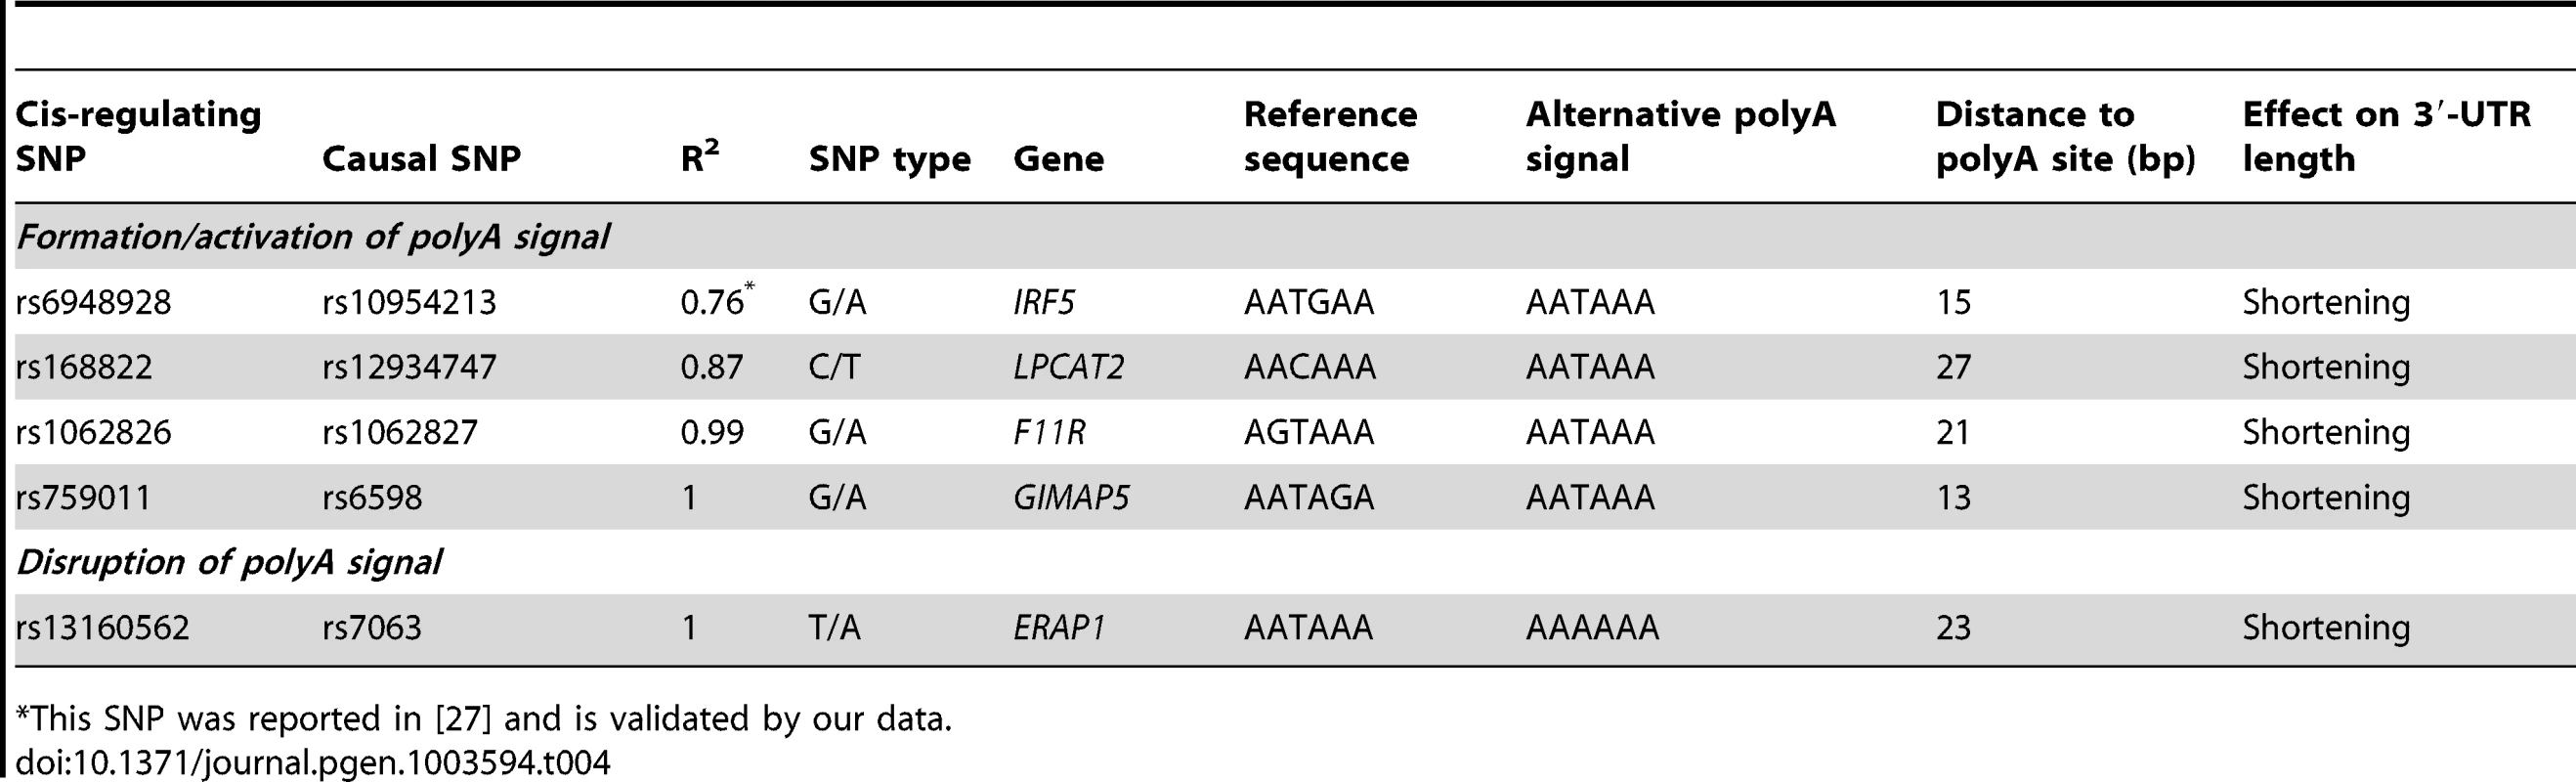 SNPs that likely affect polyadenylation due to a change in the polyadenylation signal.